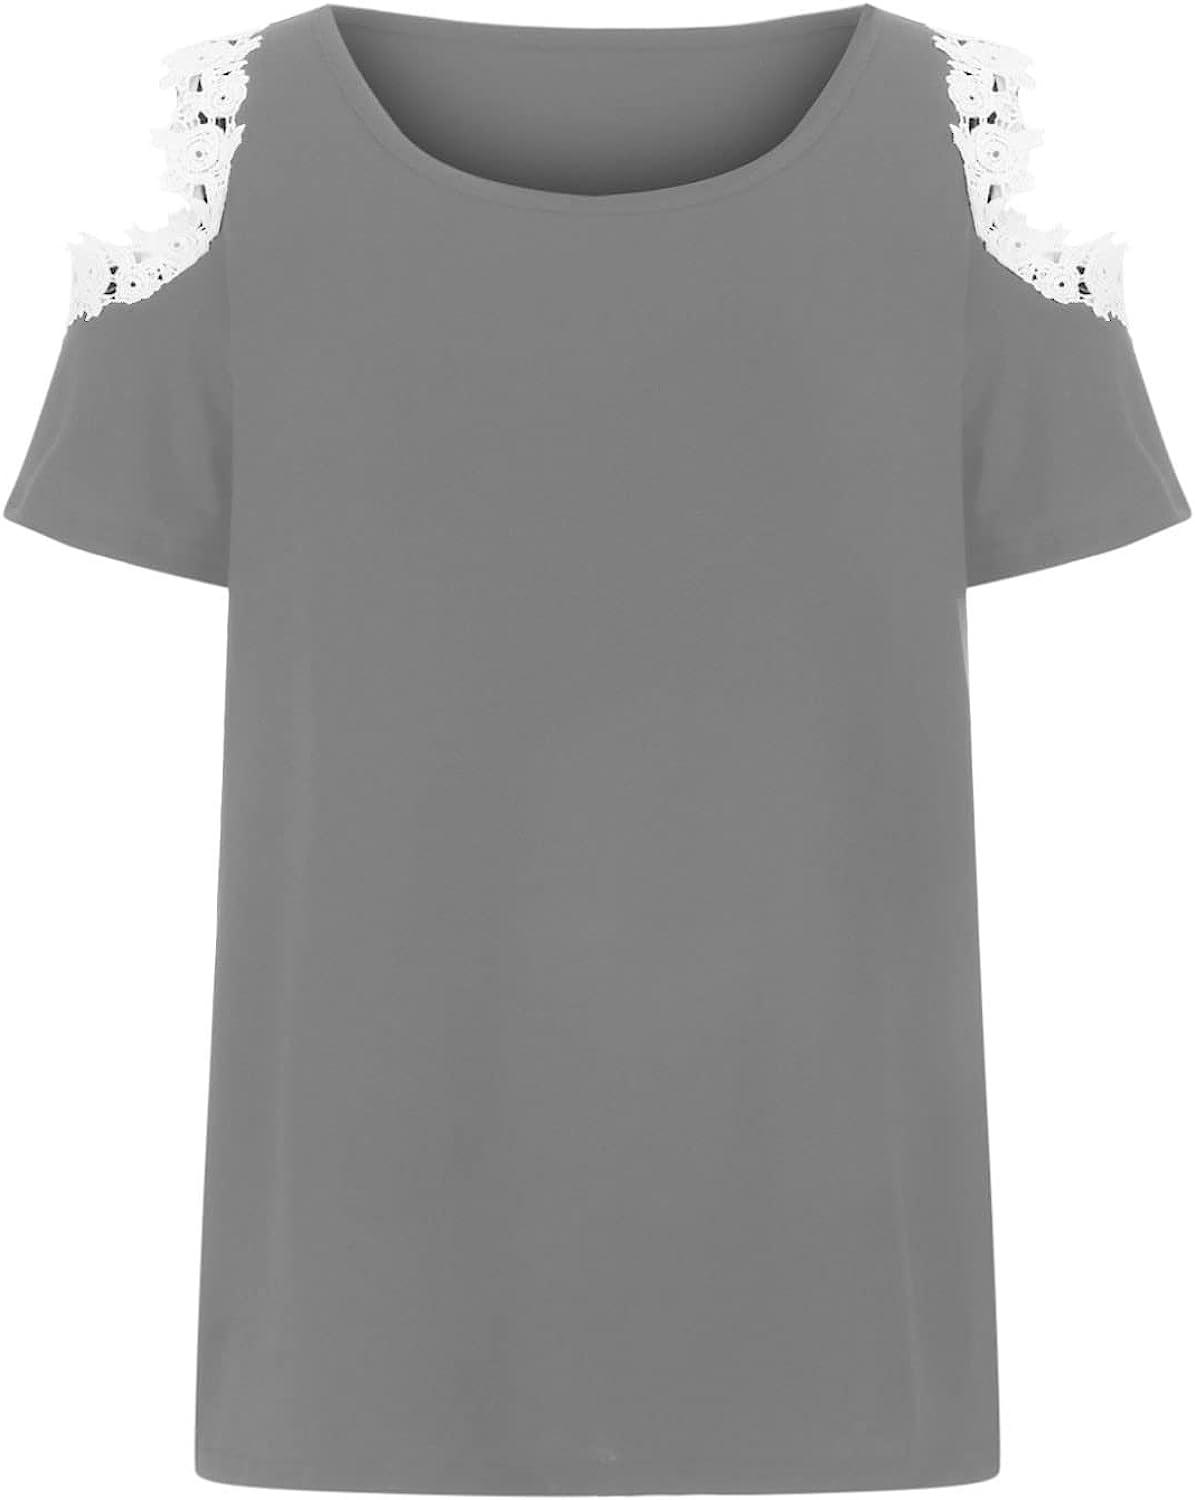  Plus Size Tops for Women, Cold Shoulder Summer T Shirt Short  Sleeves Tunic Sexy Off The Shoulder Tops V Neck(Gray, XL) : Clothing, Shoes  & Jewelry